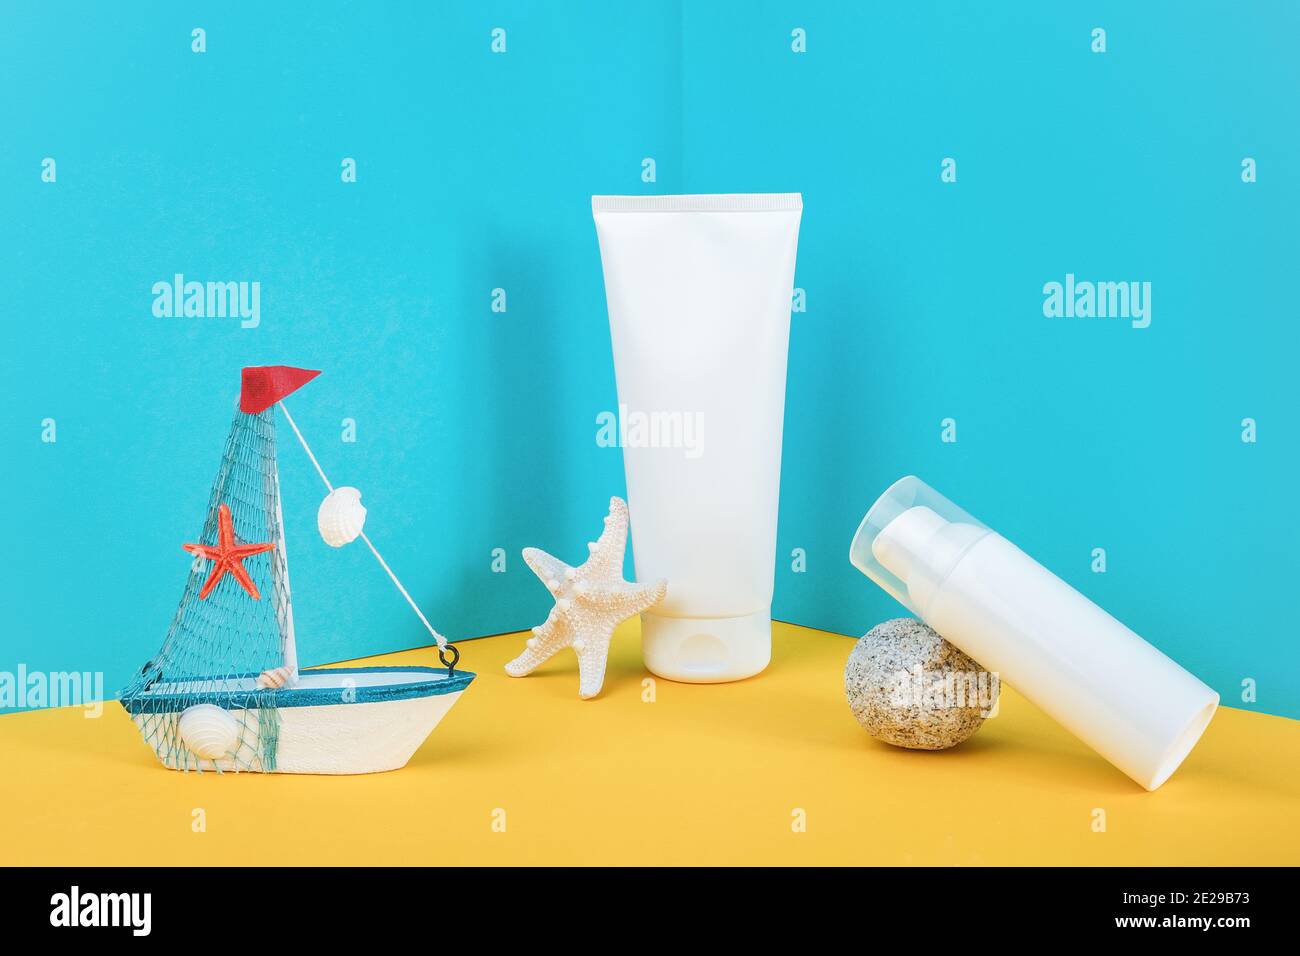 White blank cosmetic tube, bottle with sunscreen, sun cream, moisturizing lotion, starfish, rock and small boat on blue, yellow background. Concept sk Stock Photo